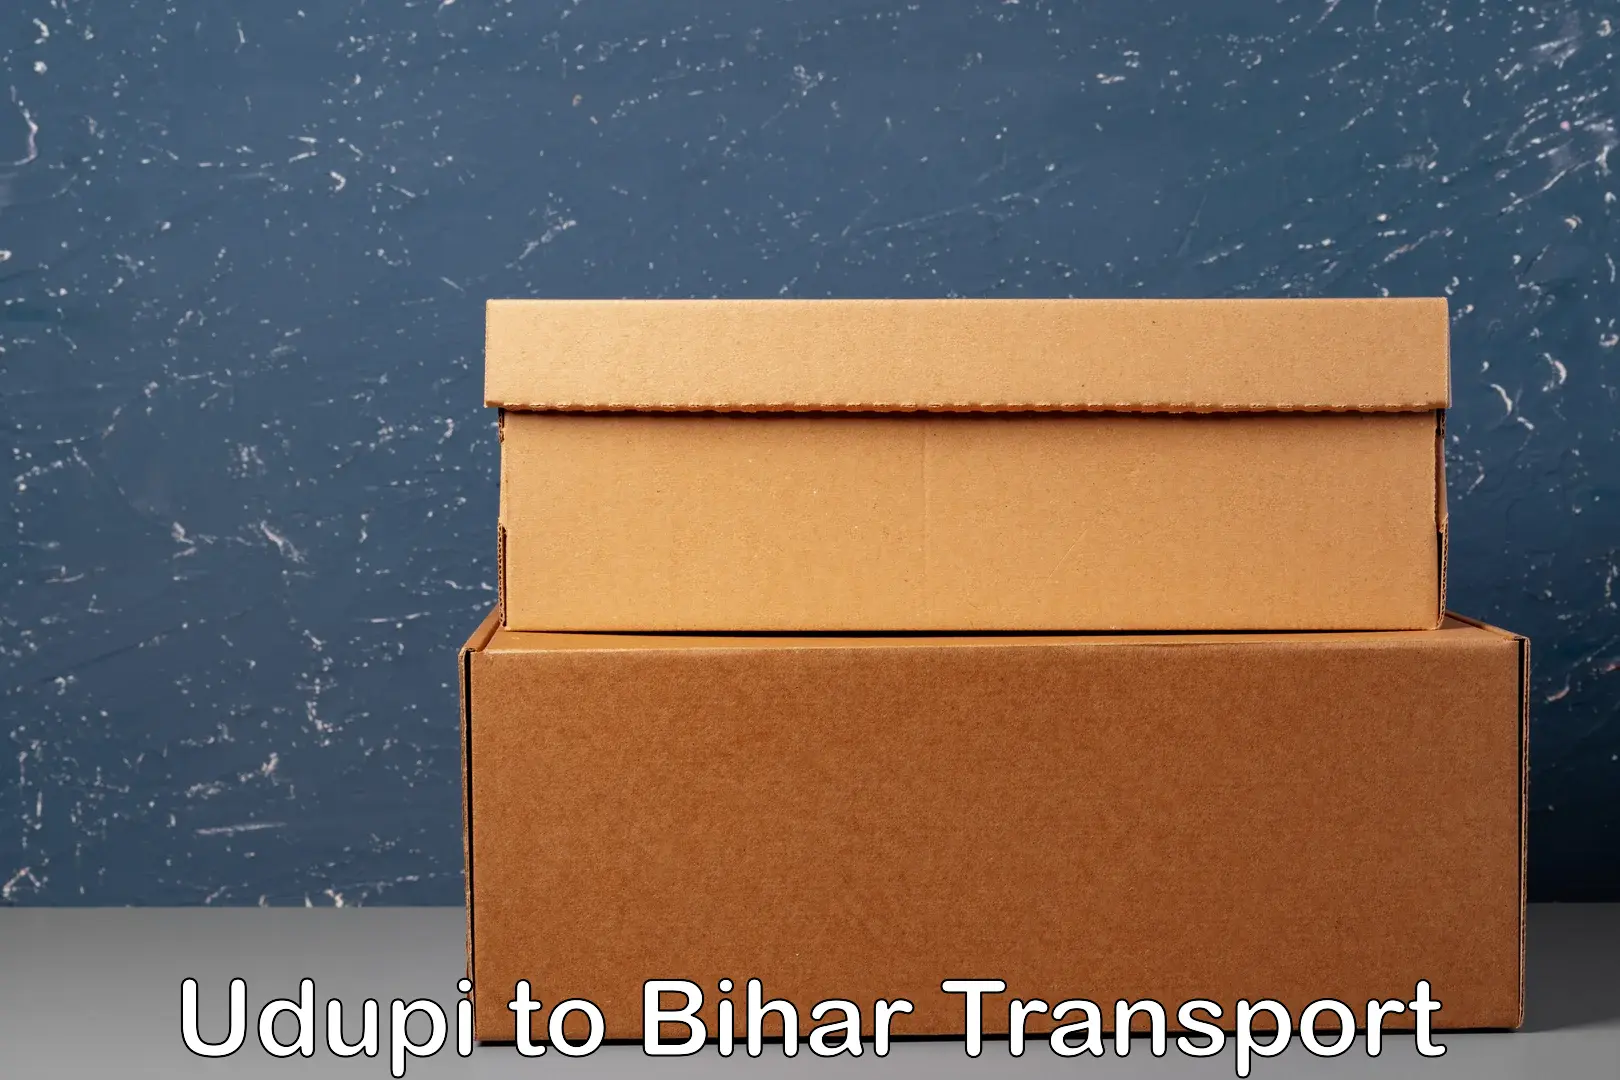 Commercial transport service in Udupi to Dhaka